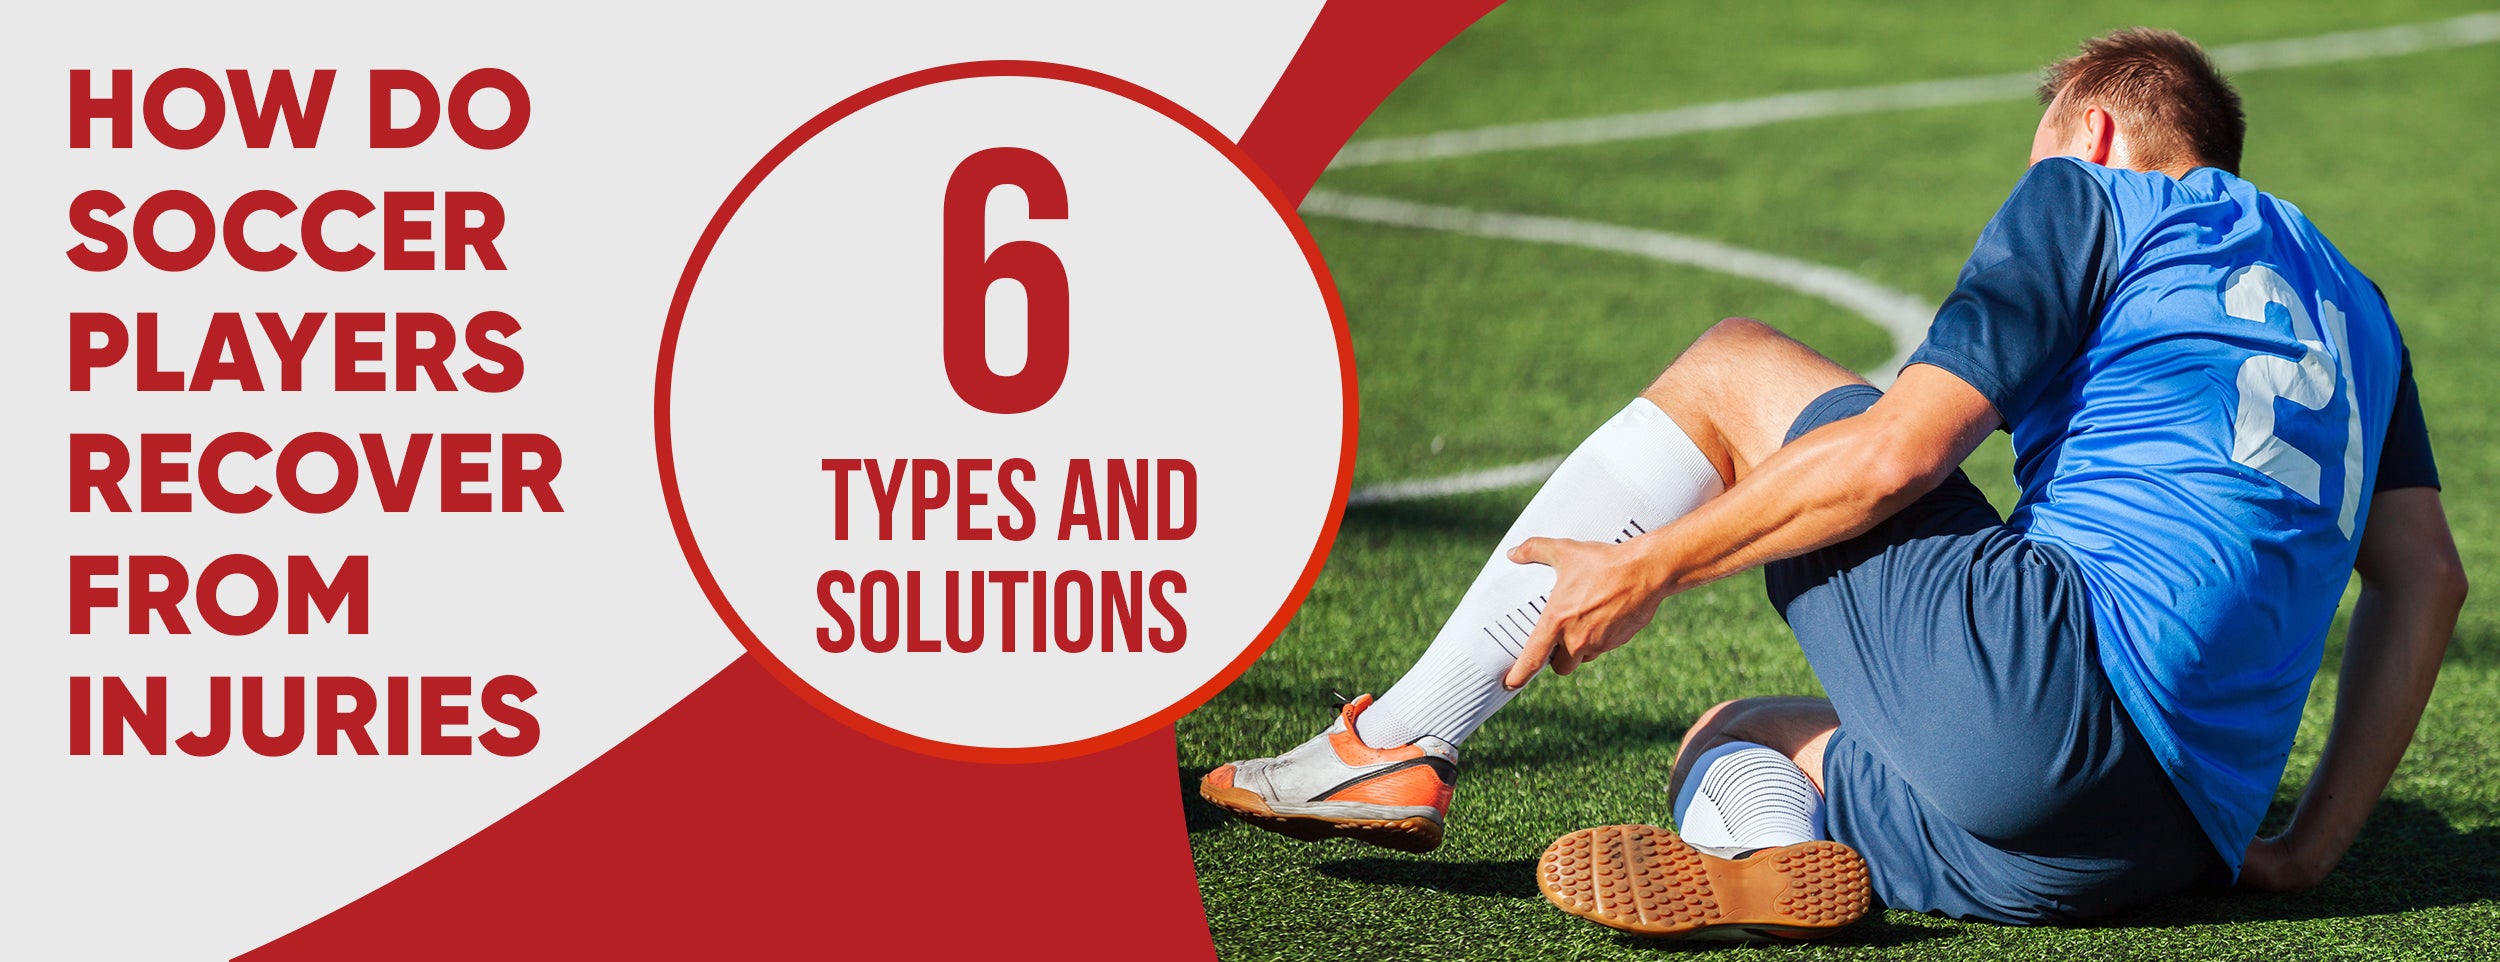 How Do Soccer Players Recover From Injuries: 6 Types & Solutions